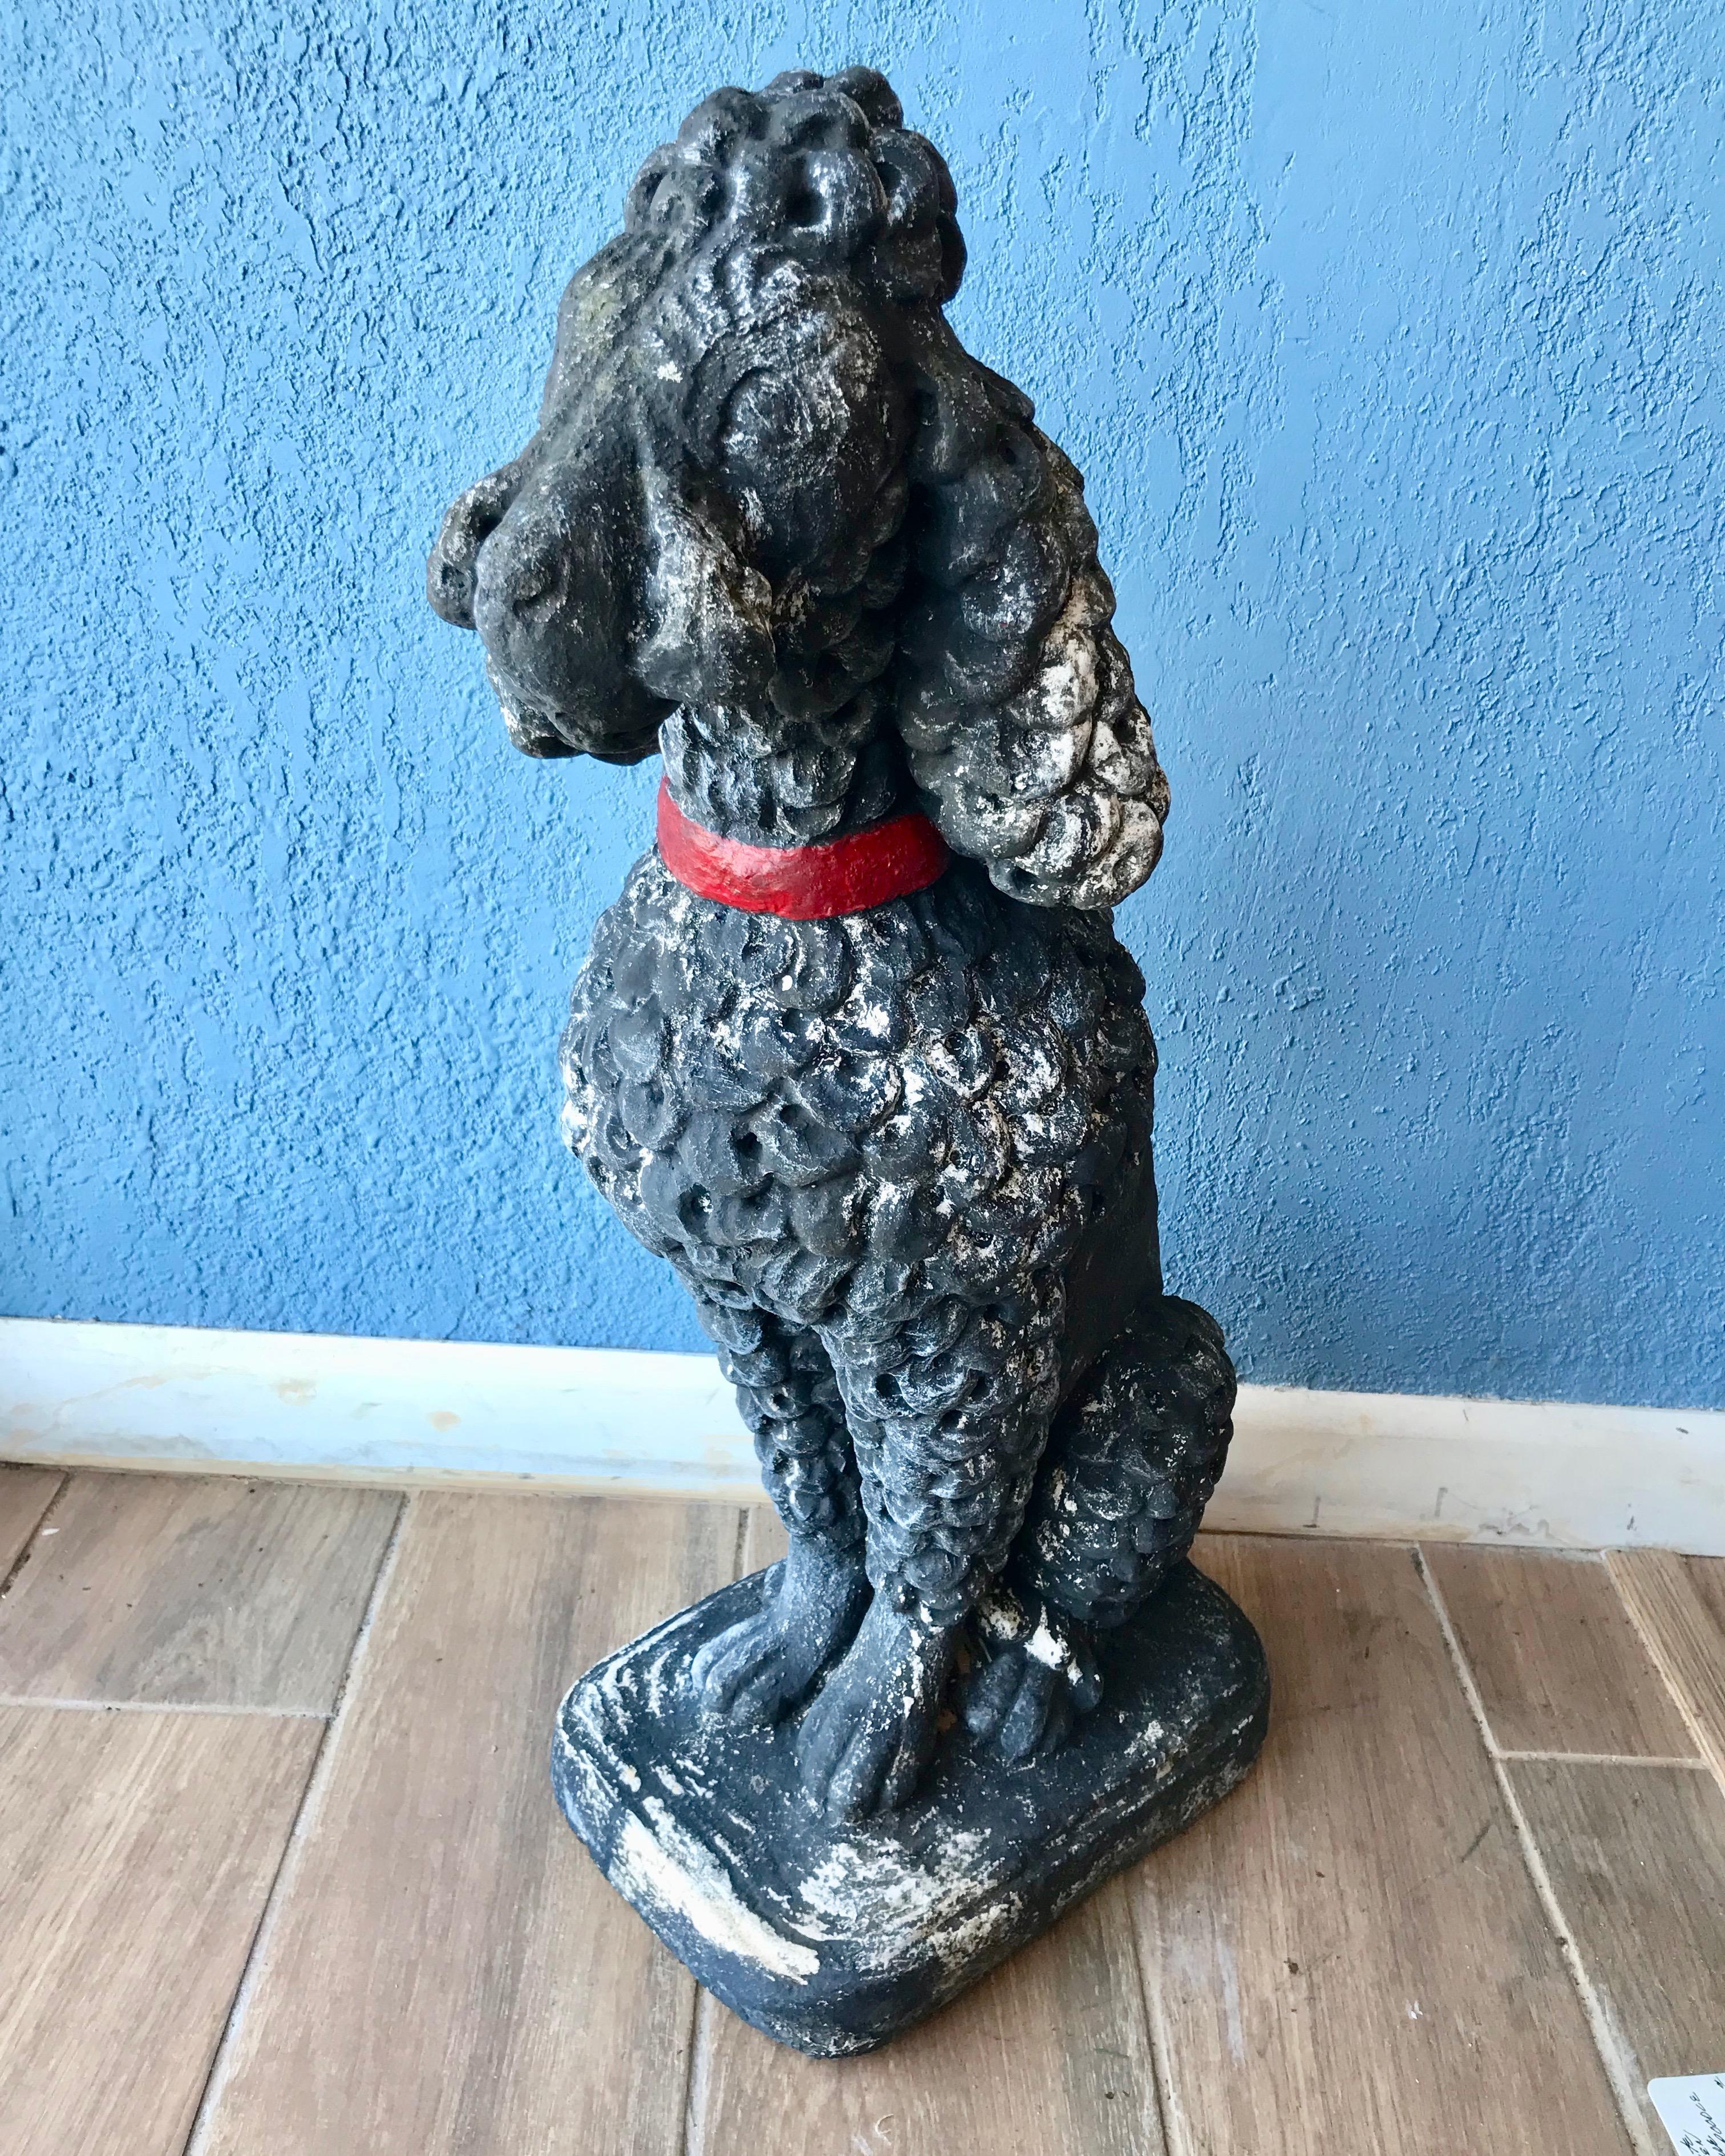 Nicely fashioned in the form of a seated miniature poodle cast in old concrete 
with a wash of black paint.
A fine and worthy garden sculpture.